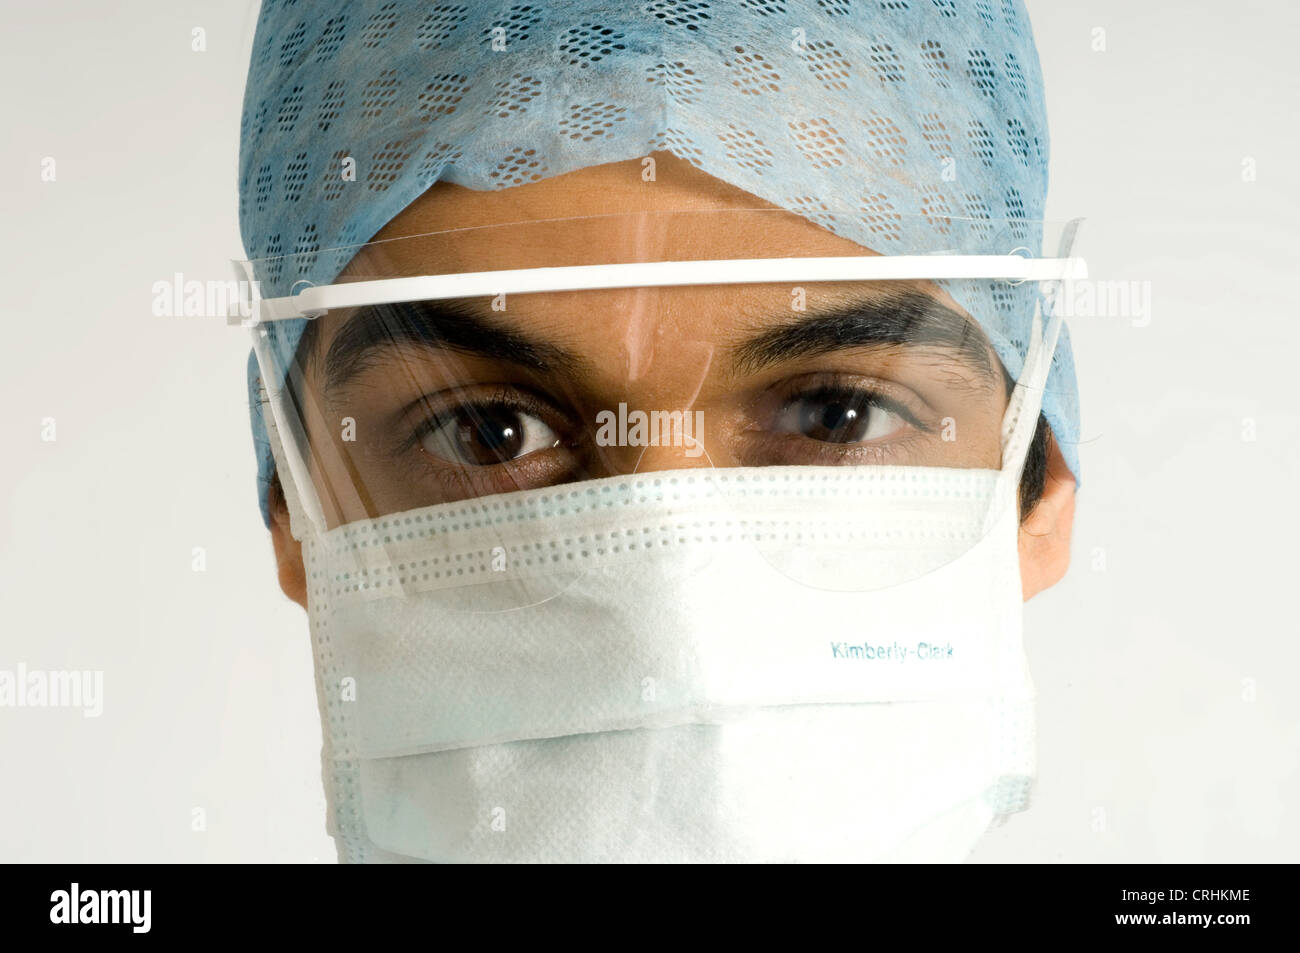 Close-up of the face of a surgeon wearing a surgical visor, hygiene mask, hygiene hat. Stock Photo